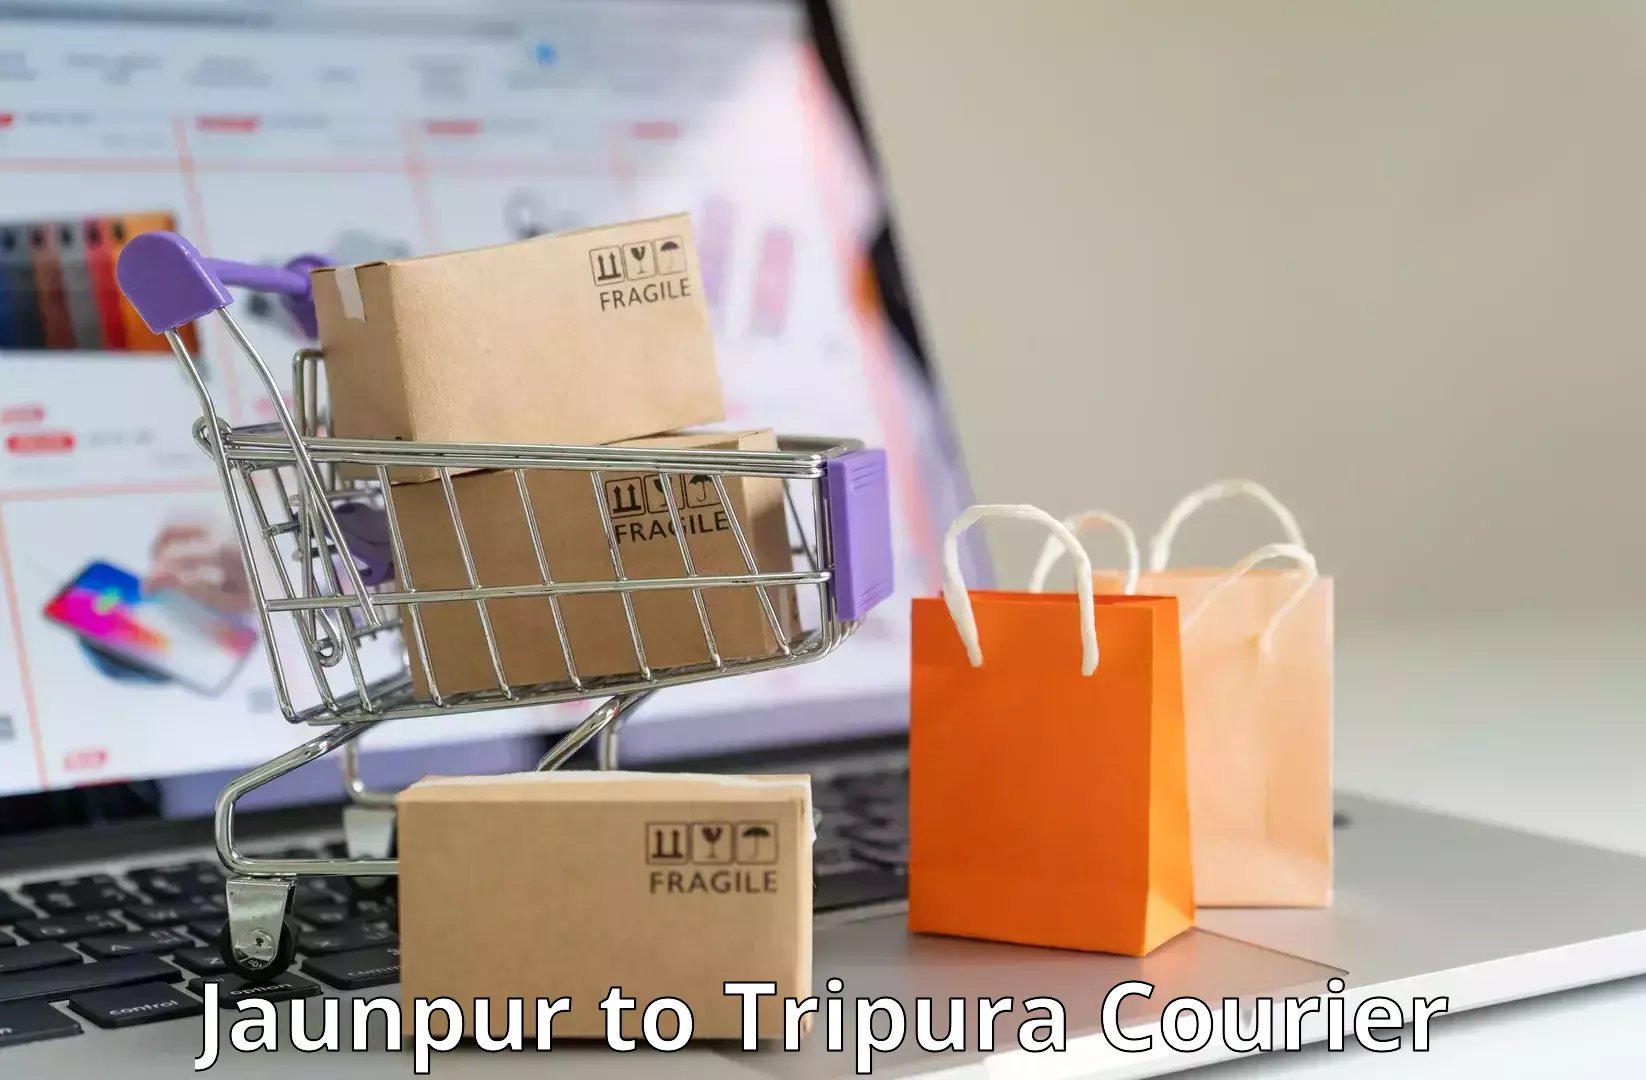 User-friendly delivery service Jaunpur to Agartala